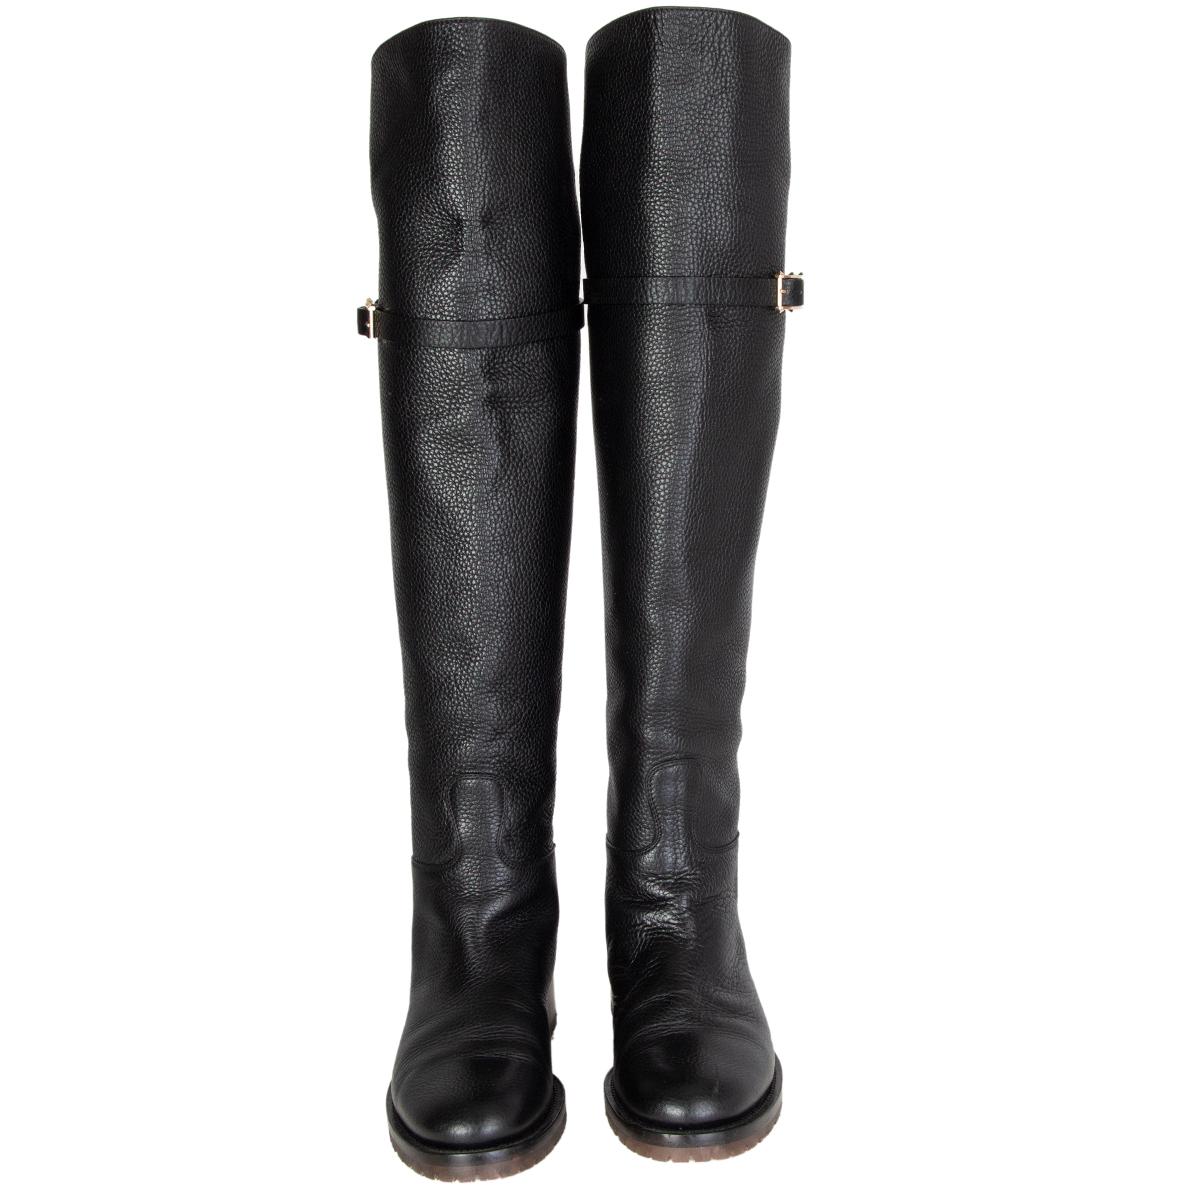 100% authentic Valentino over-knee boot sin black grained calfskin and rubber sole. Have been worn once and are in excellent condition. 

Measurements
Imprinted Size	38
Shoe Size	38
Inside Sole	25.5cm (9.9in)
Width	8cm (3.1in)
Heel	3cm